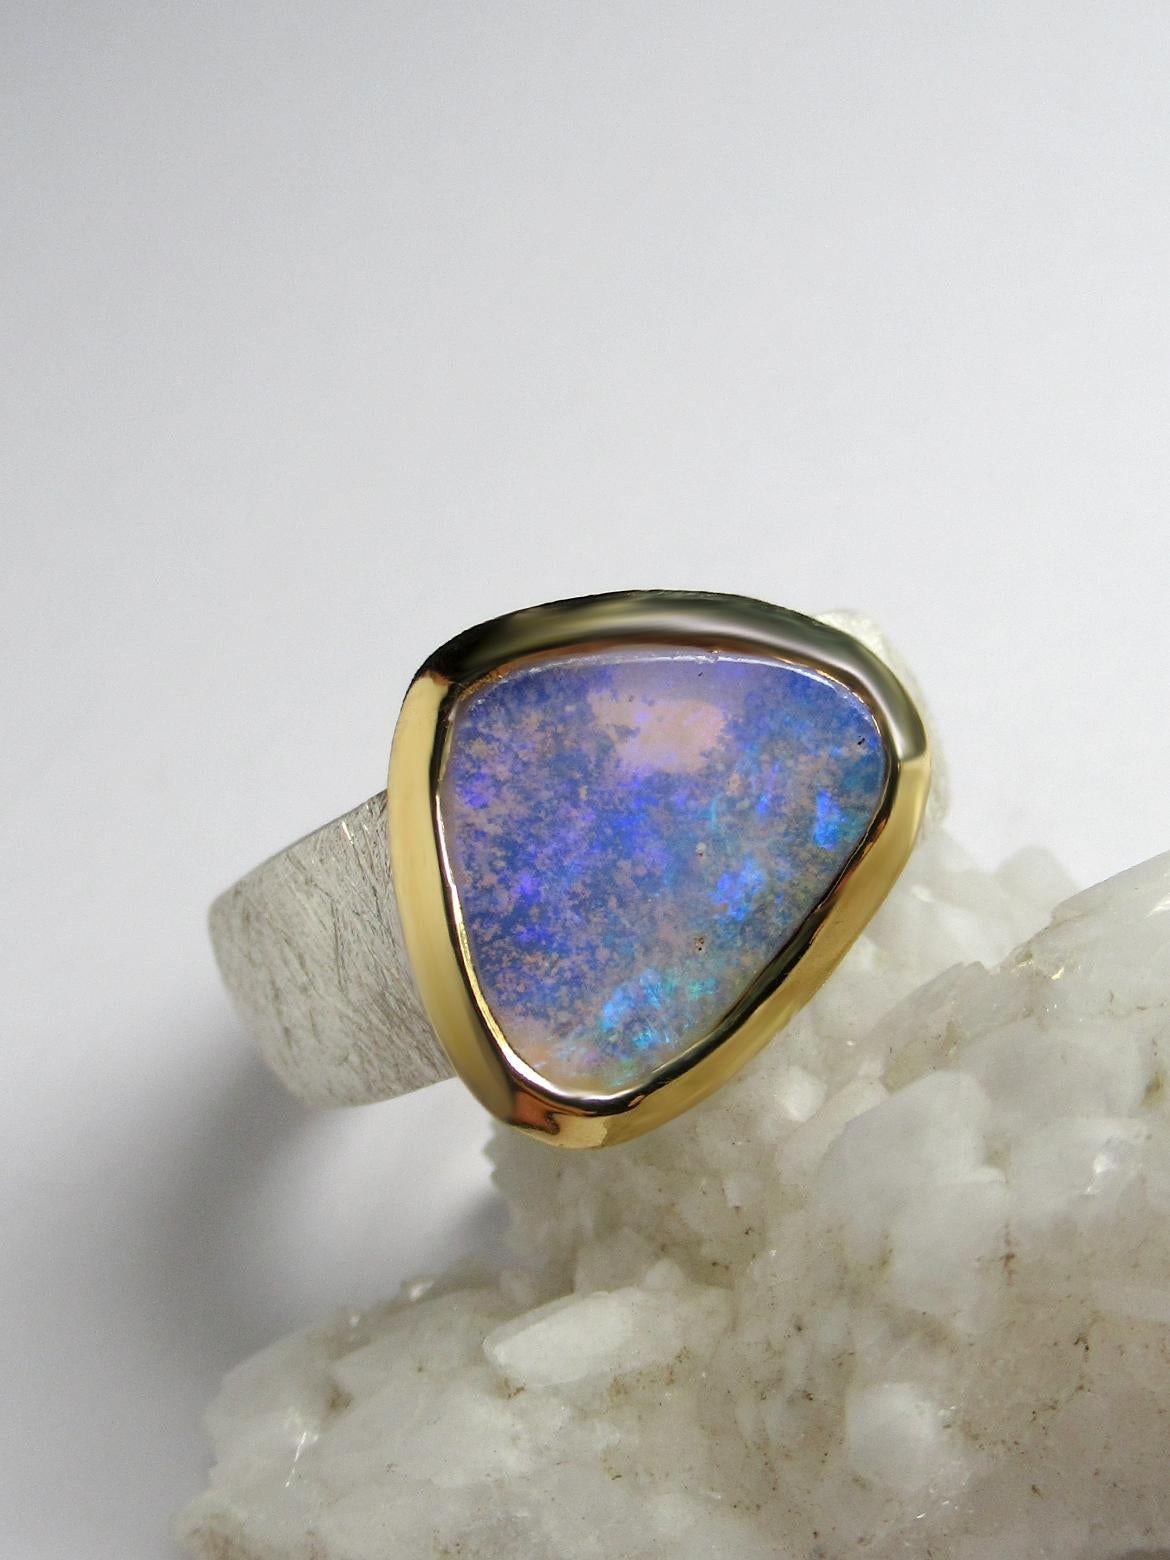 Australian Crystal Opal Ring Silver 18K Gold neon wedding anniversary For Sale 3